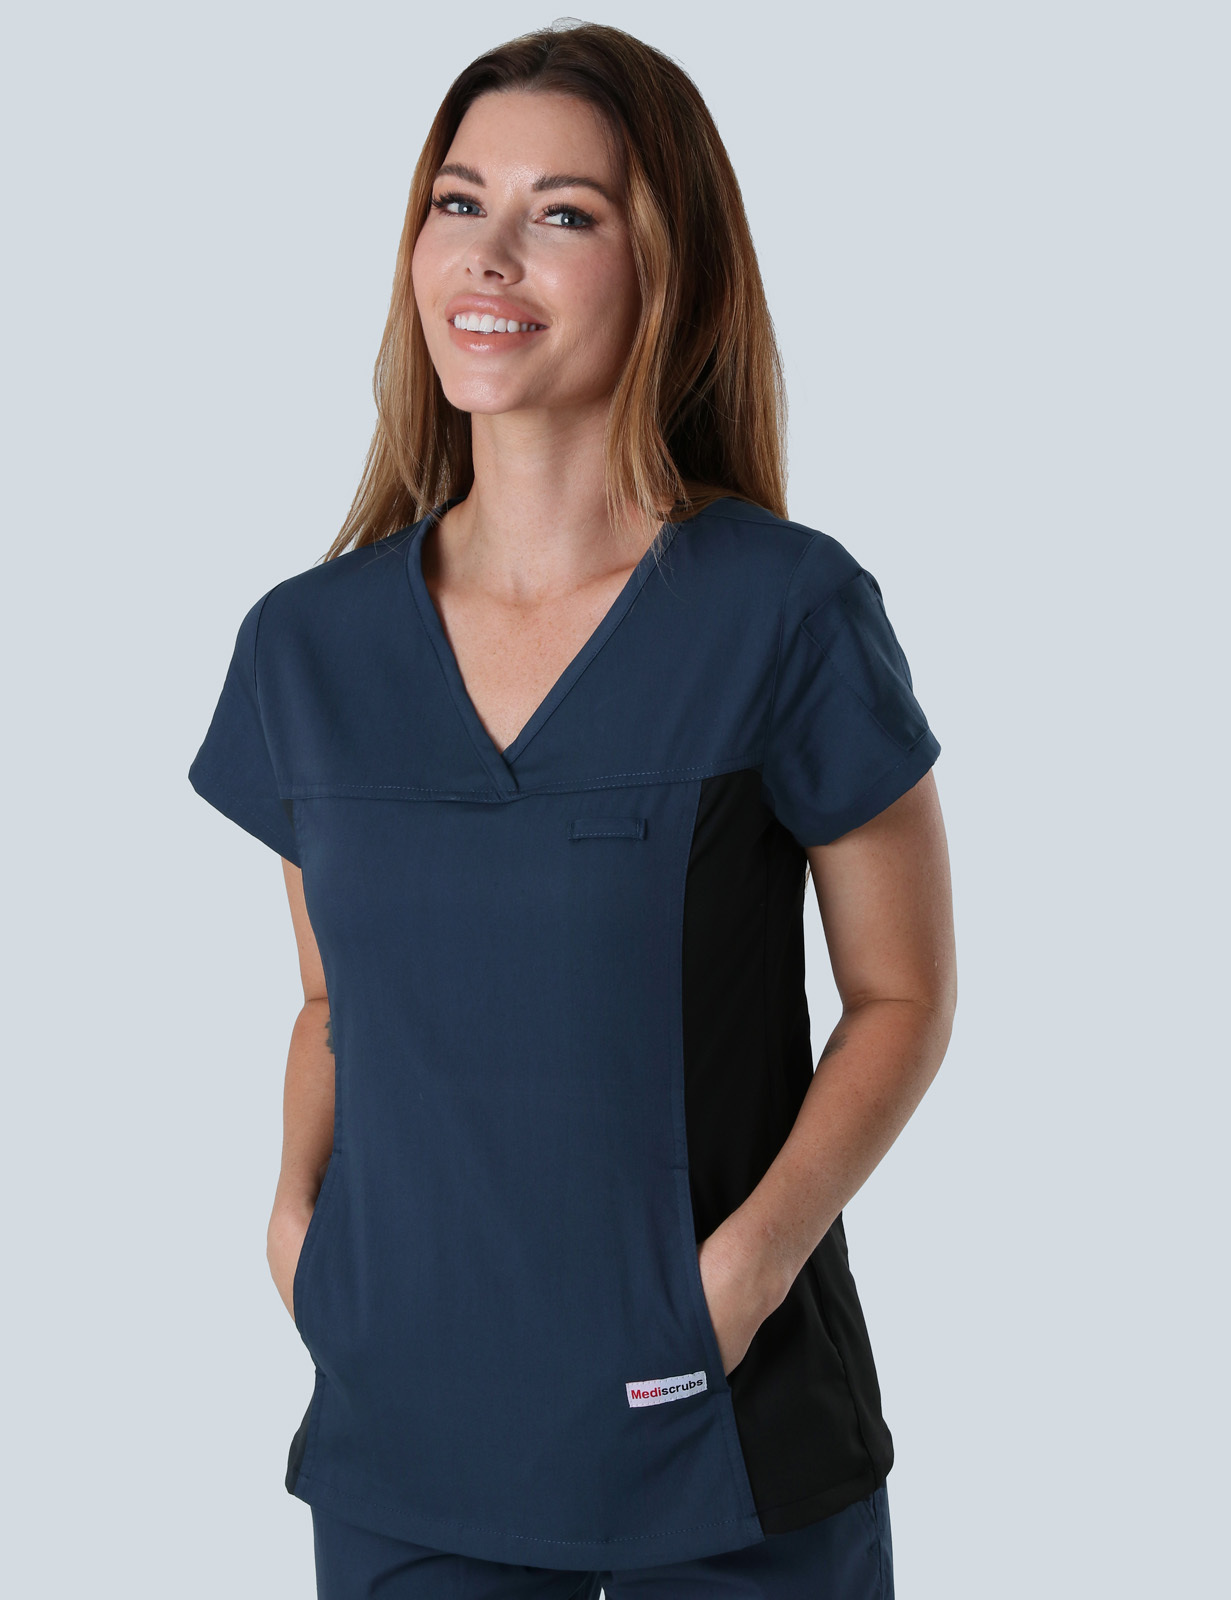 Gladstone Hospital - ED Nurse Practitioner (Women's Fit Spandex Scrub Top and Cargo Pants in Navy incl Logos)